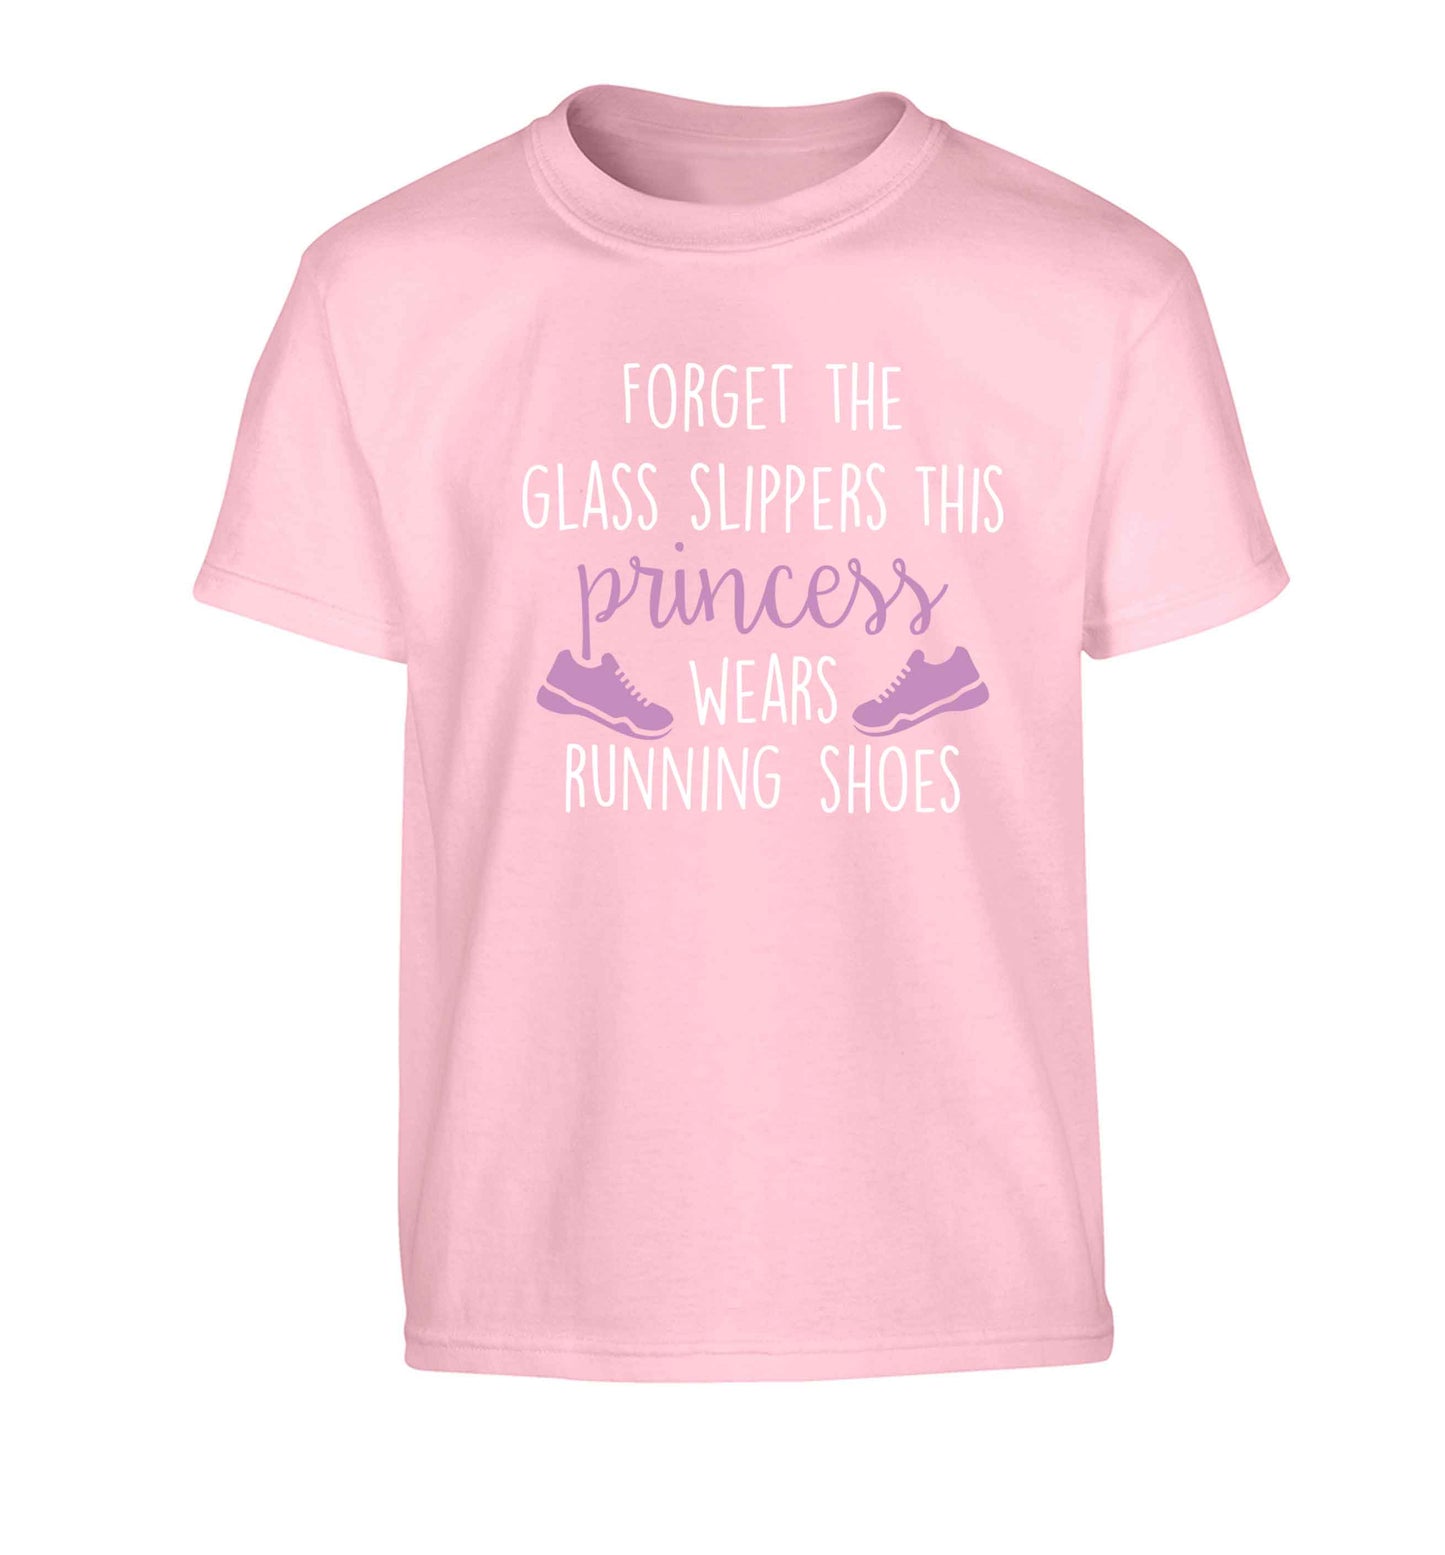 Forget the glass slippers this princess wears running shoes Children's light pink Tshirt 12-13 Years